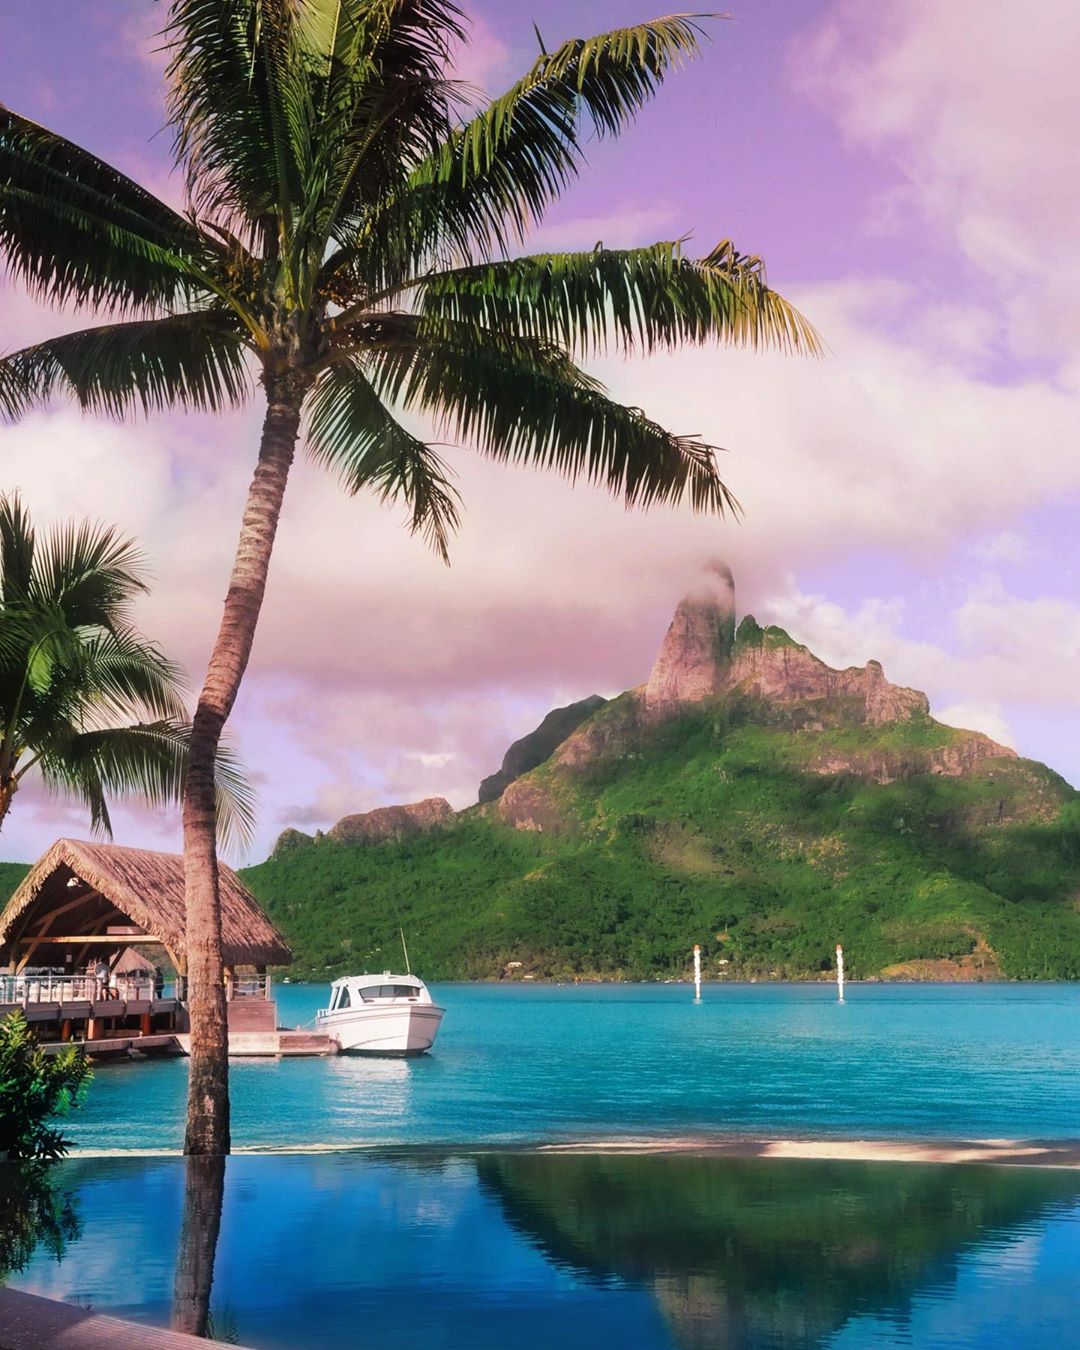 French Polynesia, Bora Bora island, view from the pool in Le Meridien Bora Hotel harbor with Mount Otemanu in the background, palm tree and boat ahead. (Nos Dren)